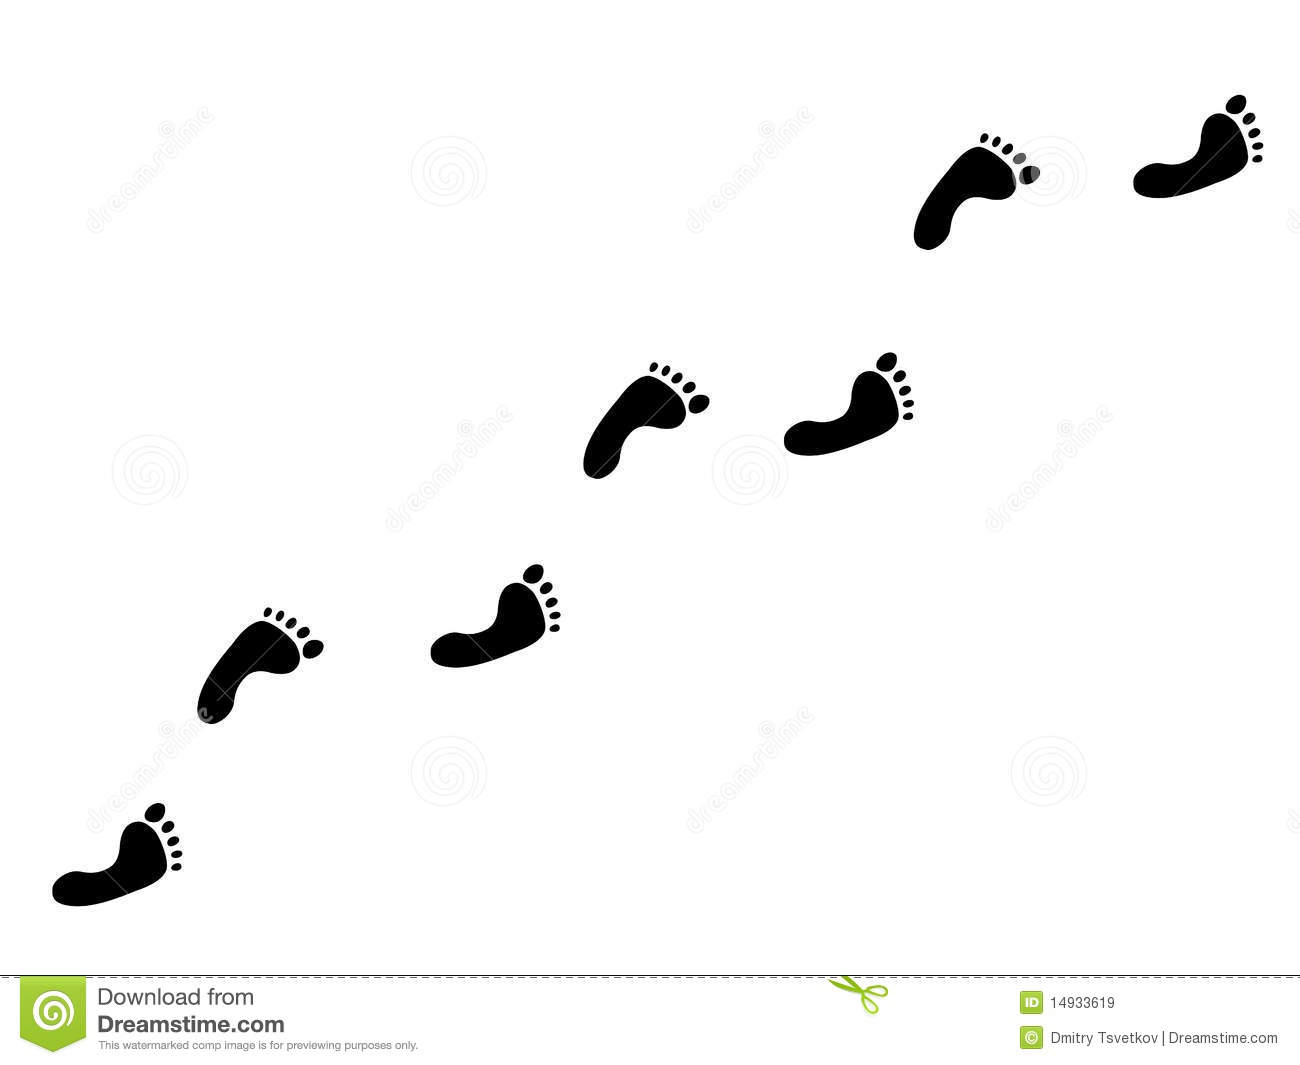 Footsteps clipart path. Walking footprints cliparts free